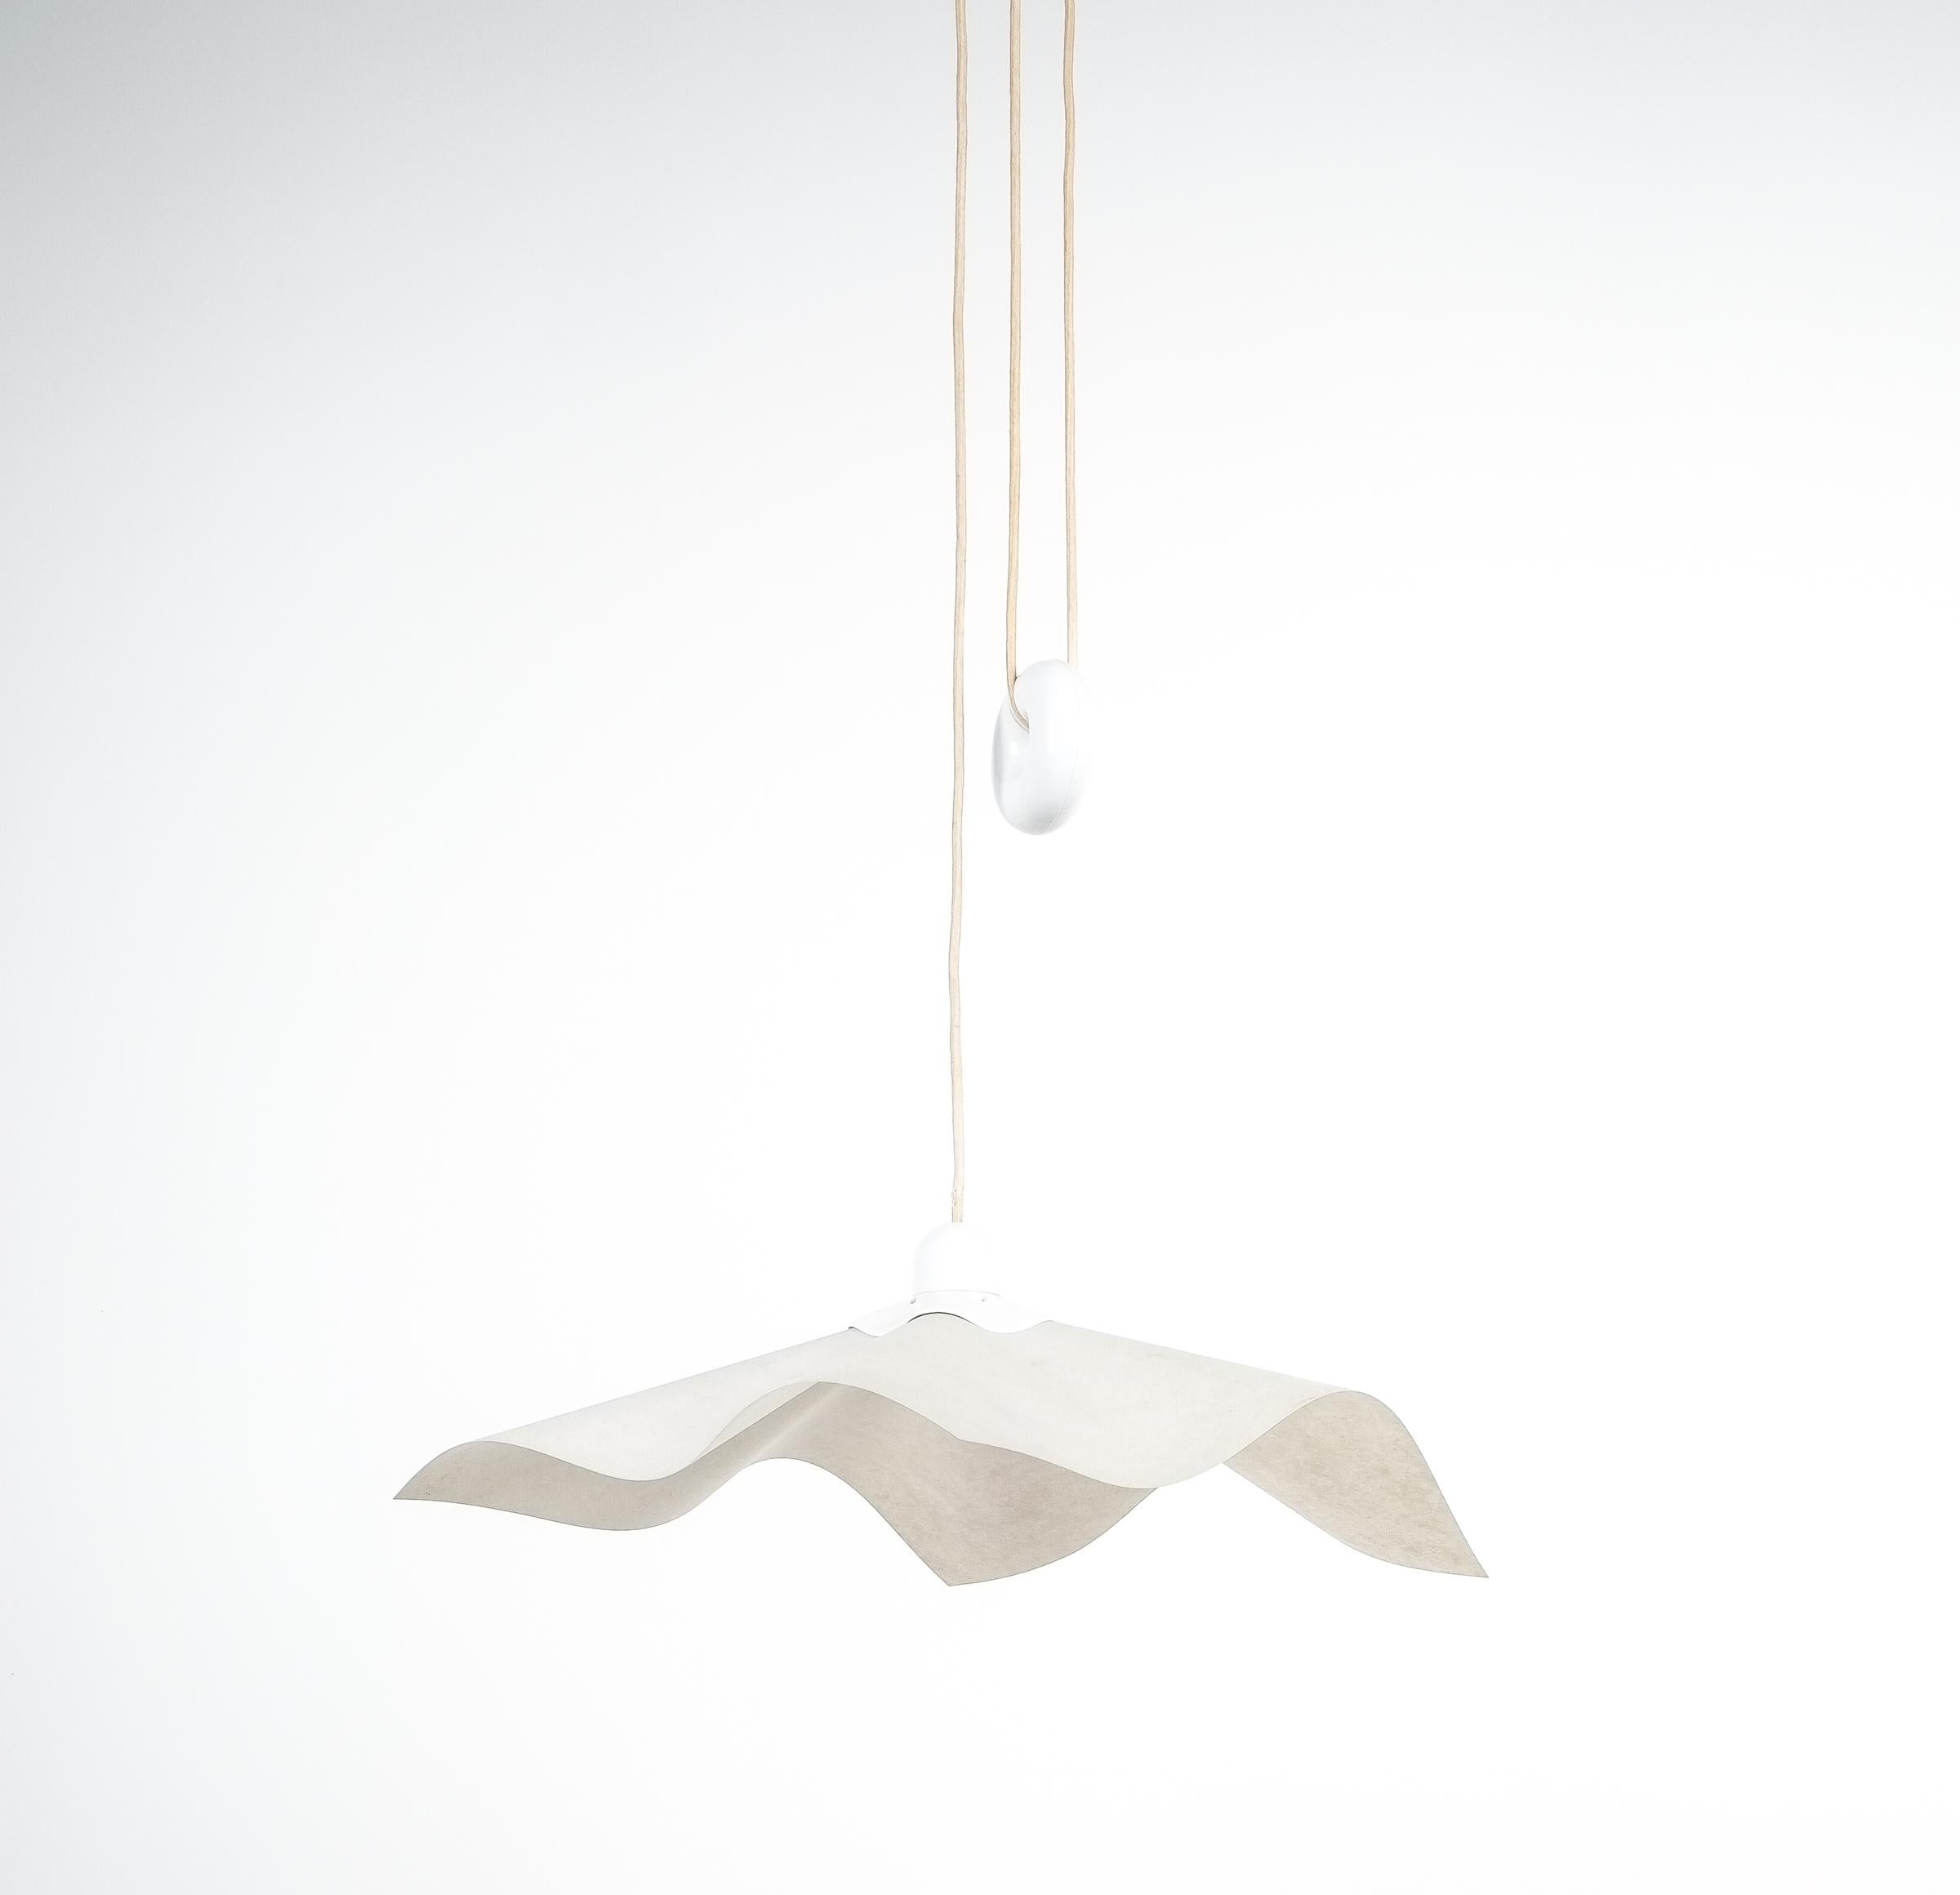 Mario Bellini Counterweight Pendant Lamp Area 50 by Artemide, Italy, 1976 For Sale 9